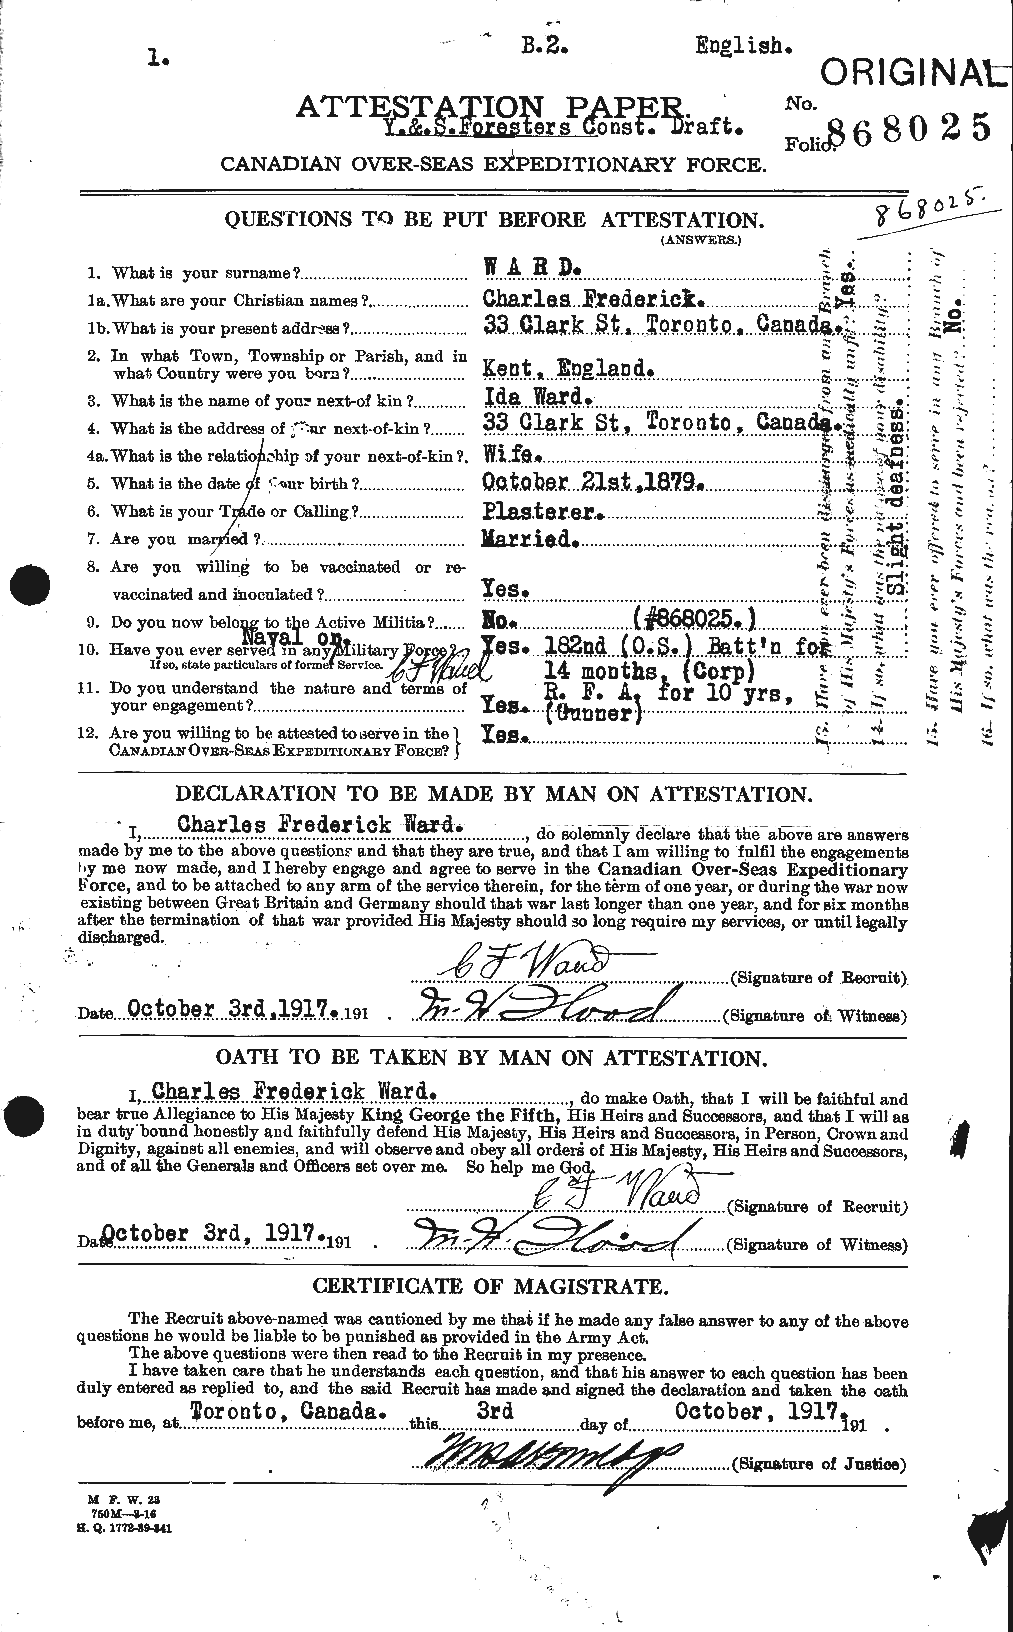 Personnel Records of the First World War - CEF 657578a